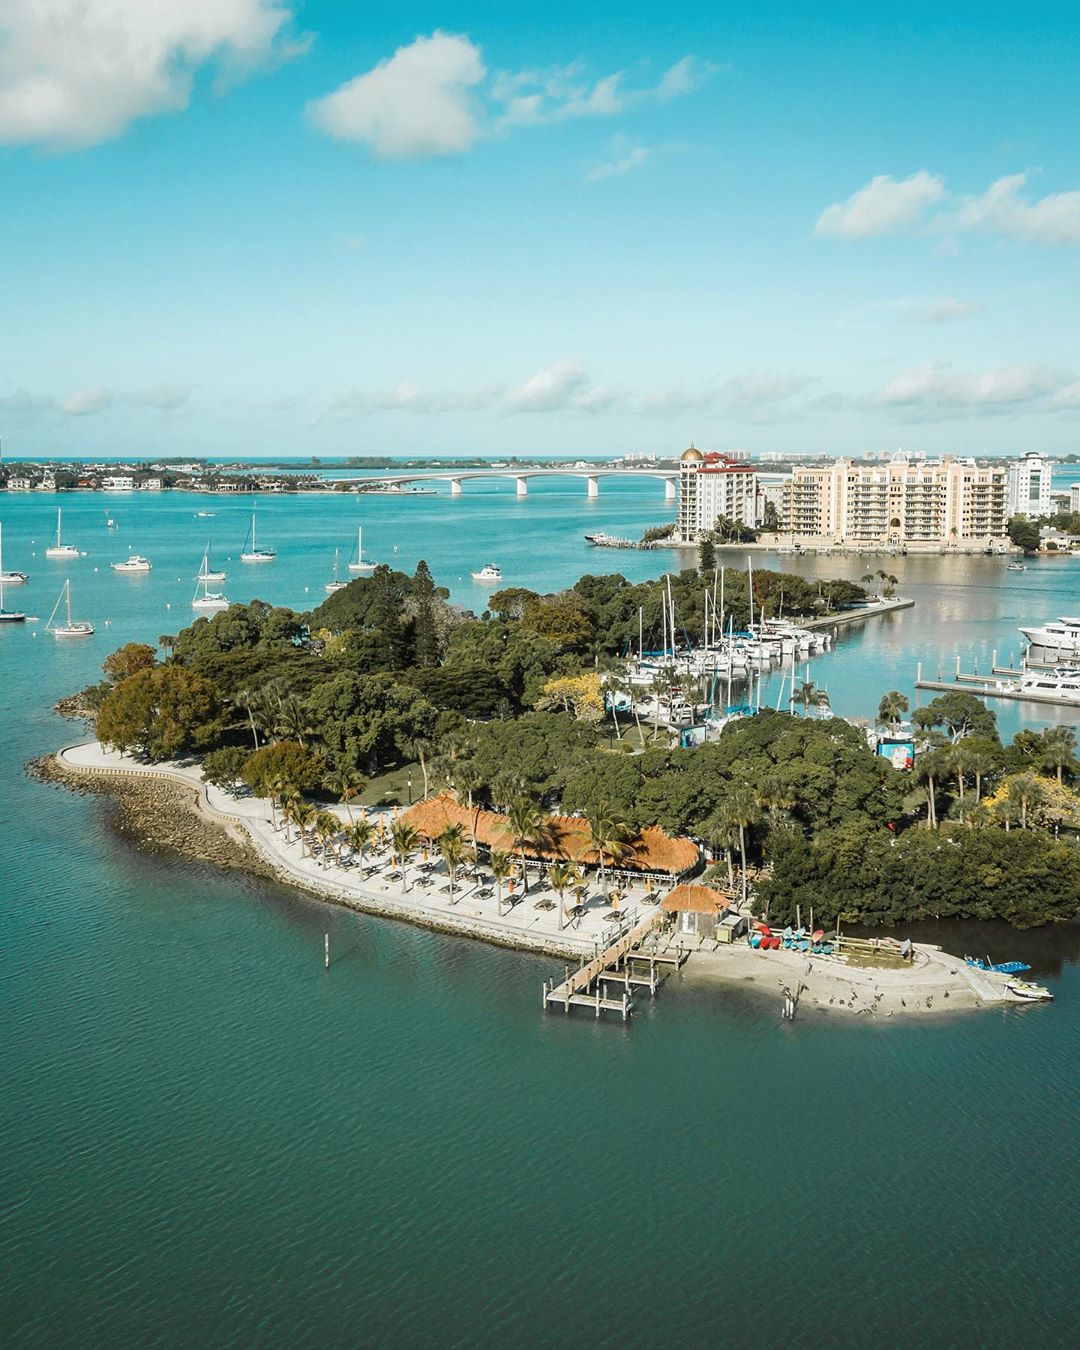 Aerial View of Bayfront Park in Sarasota, FL. Photo by Instagram user @chasingthedronelife